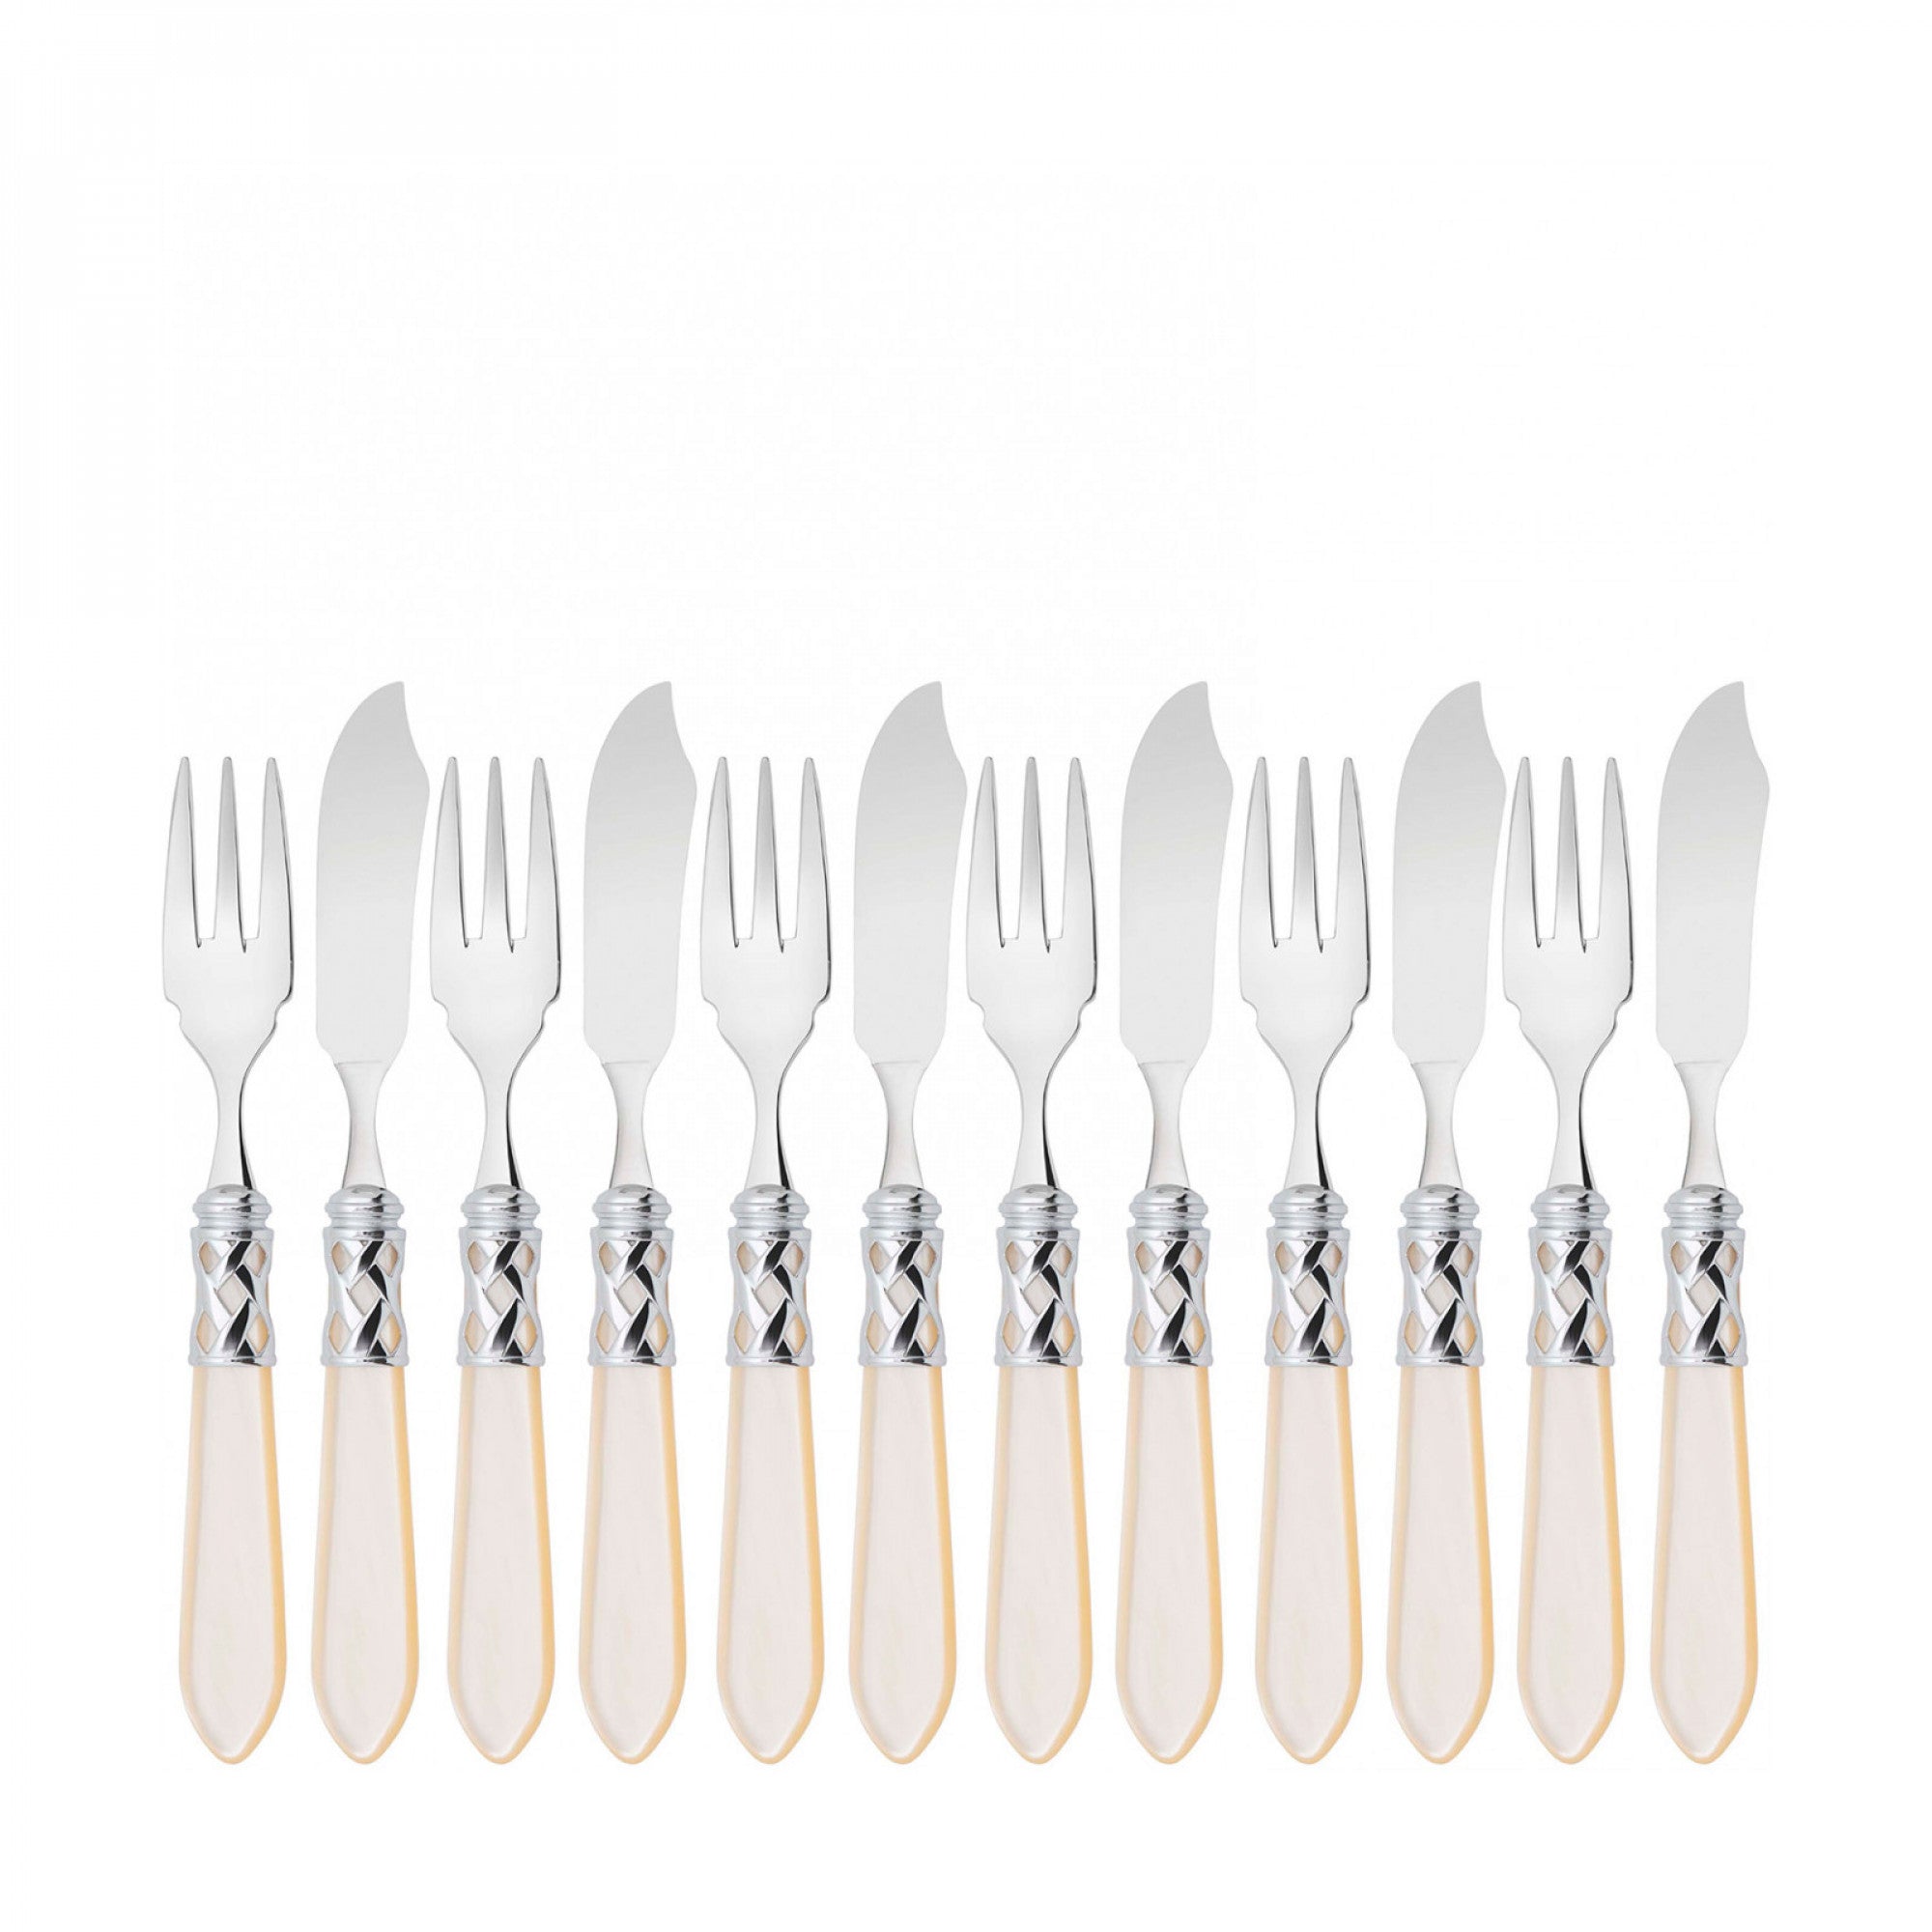 BUGATTI, Aladdin, 12-piece fish cutlery set in 18/10 stainless steel, chromed ring and mother-of-pearl effect handle